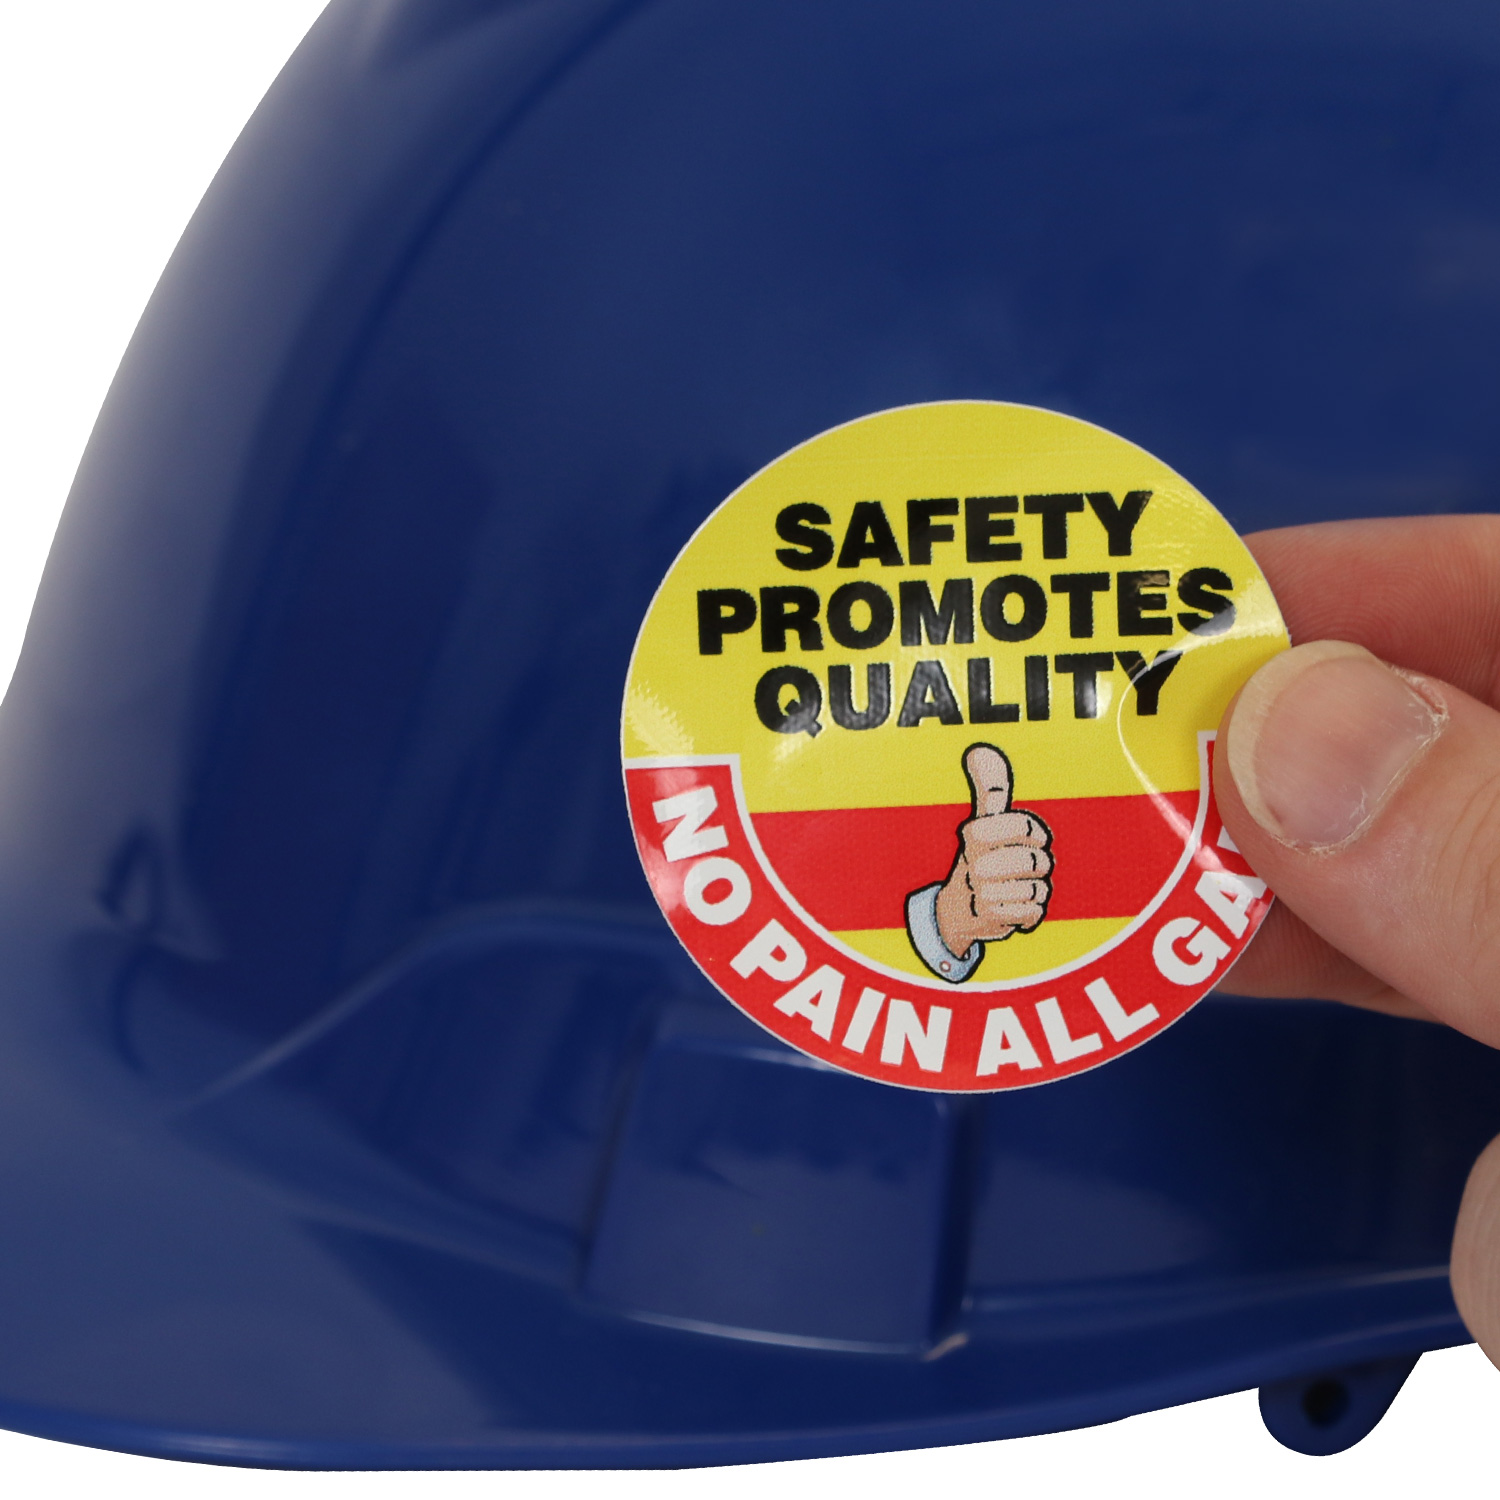 Ask Me Hard Hat Decals Signs, SKU: HH-0517